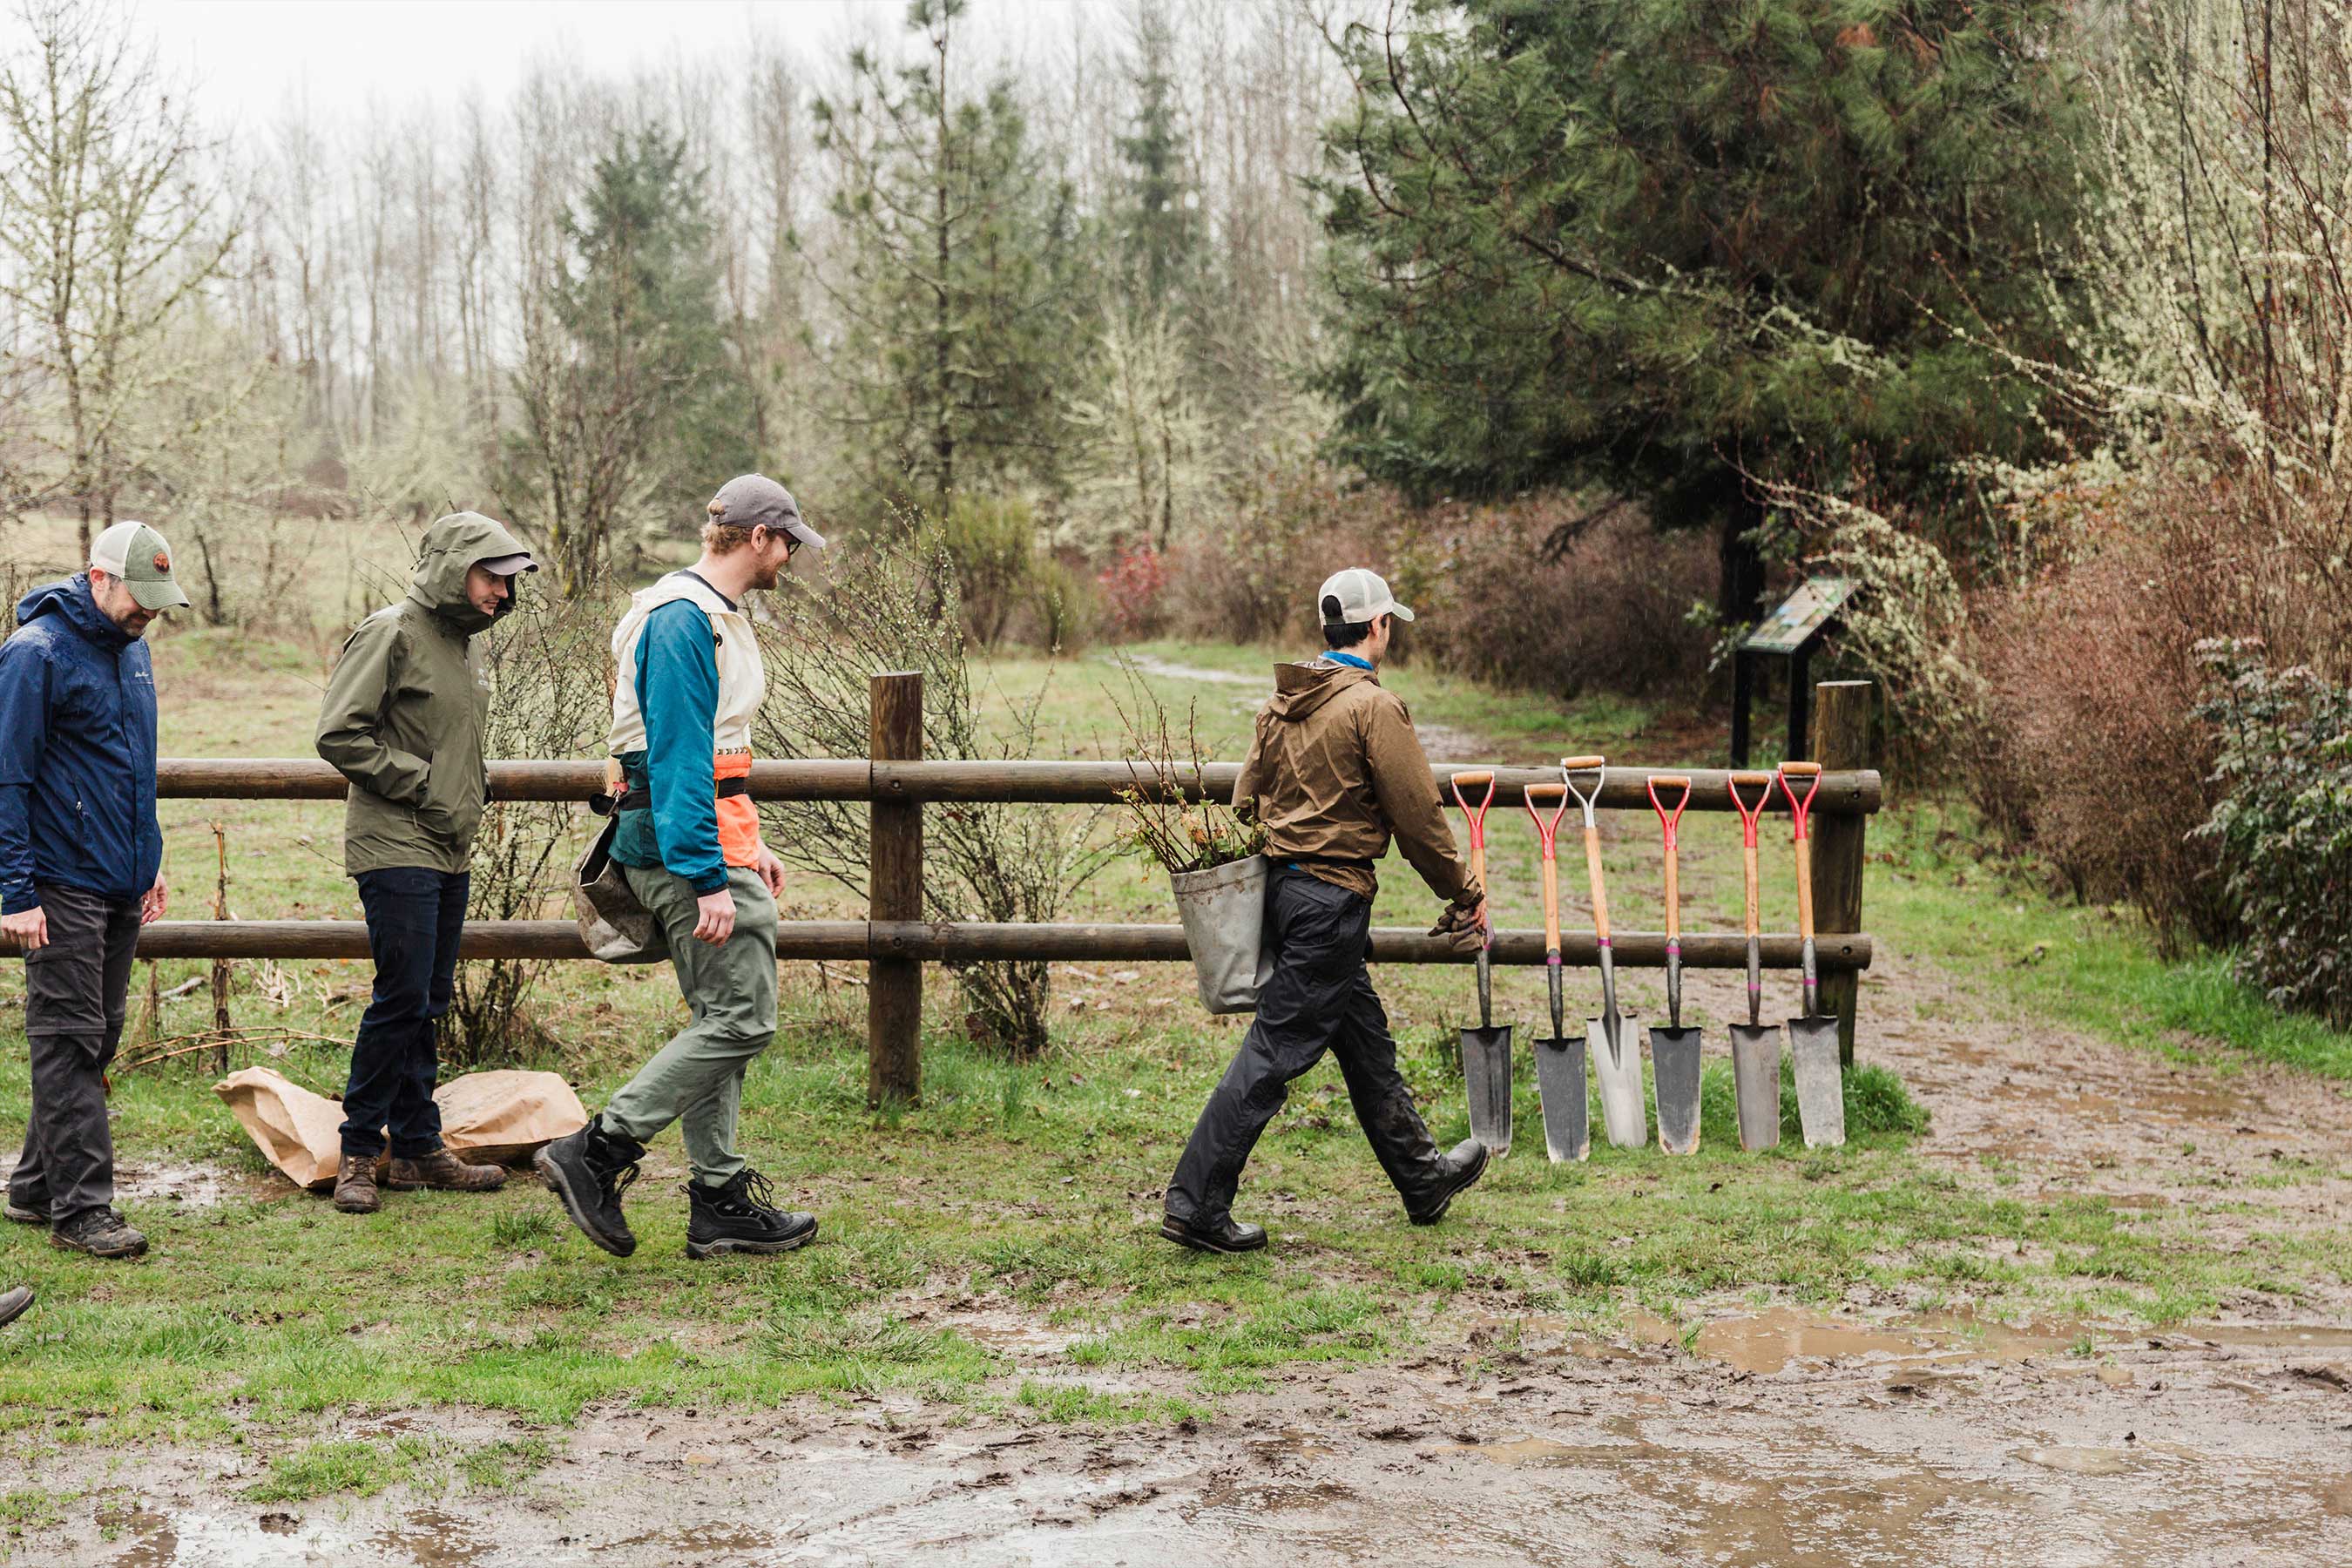 A team prepares to plant tree seedlings in the Pacific Northwest. Clayton and the Arbor Day Foundation will plant trees in four locations like this across the country.